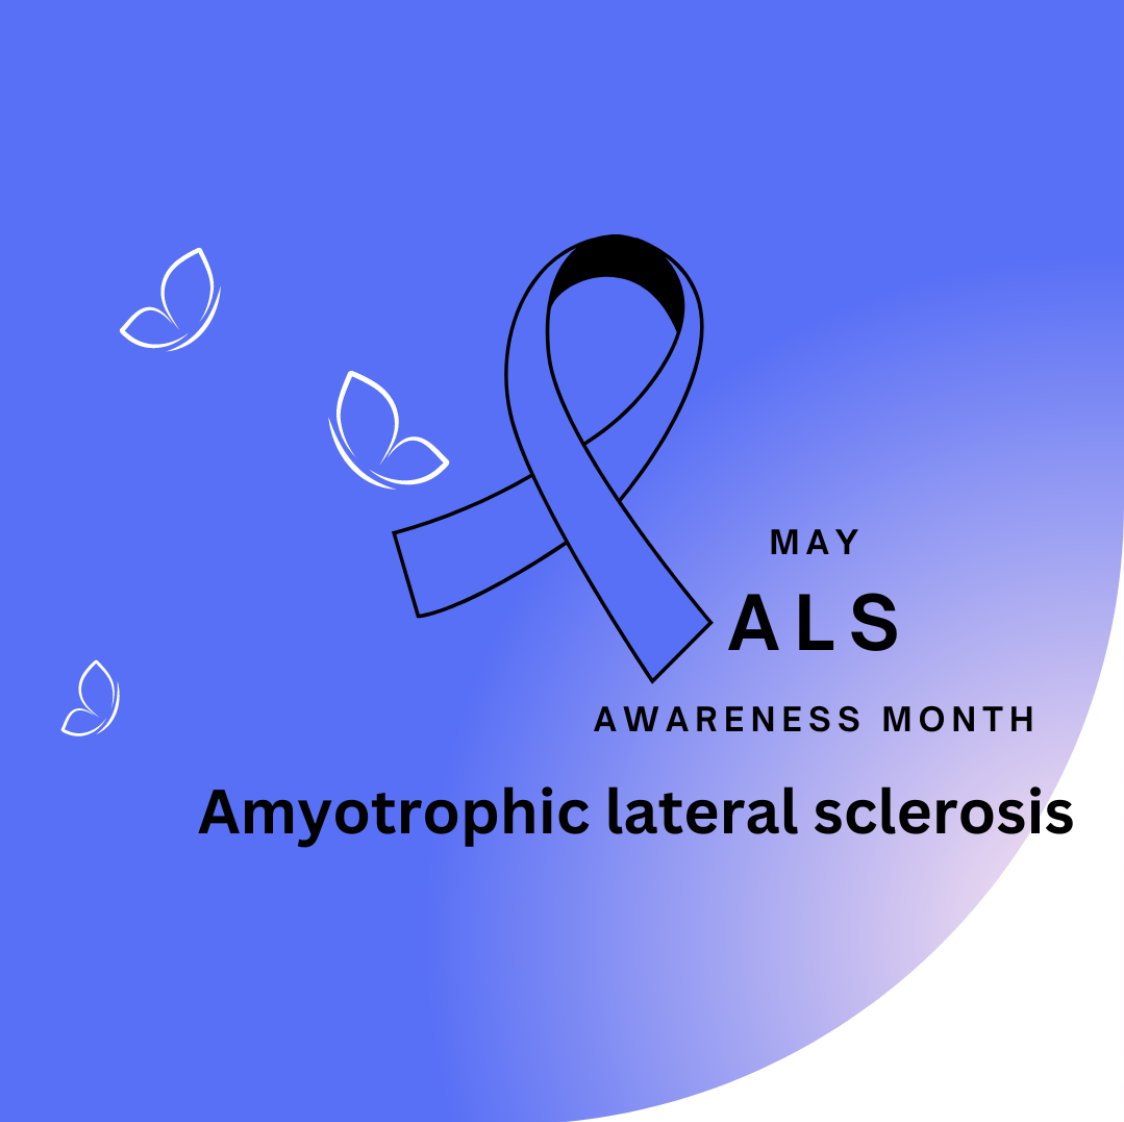 Your Health Guide To: ALS (Amyotrophic Lateral Sclerosis)